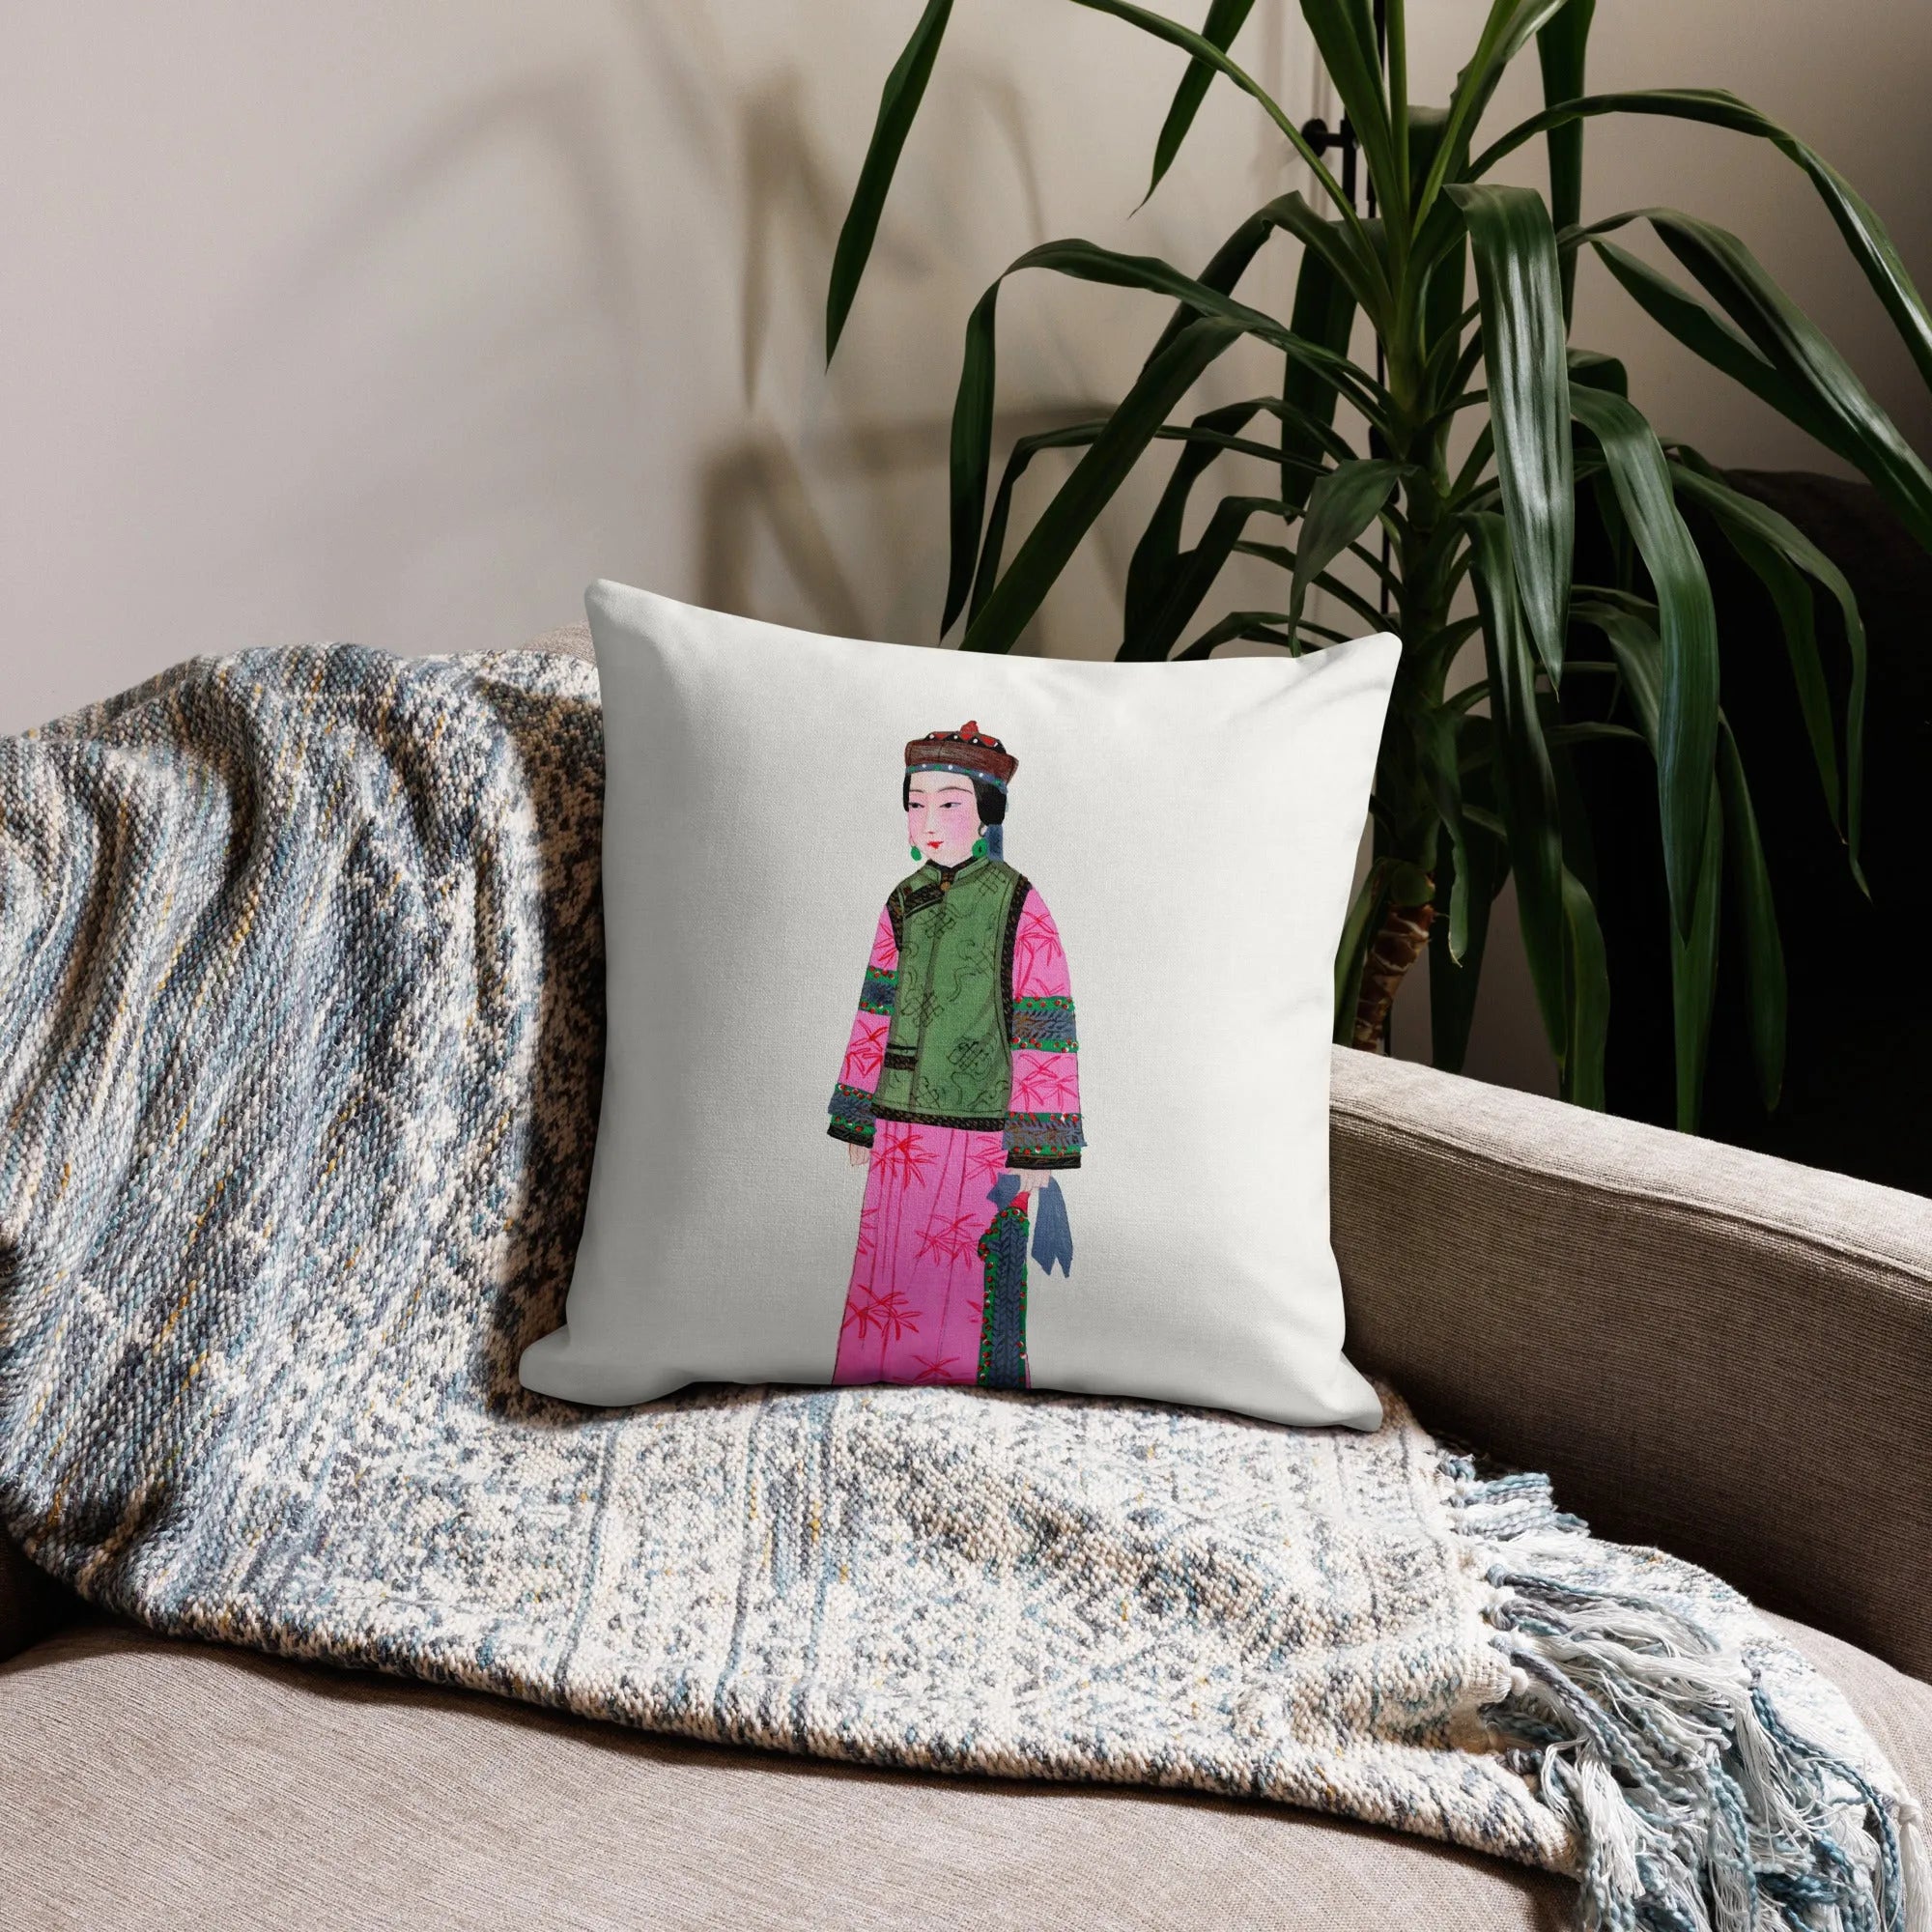 Chinese Noblewoman In Winter Cushion - Throw Pillows - Aesthetic Art